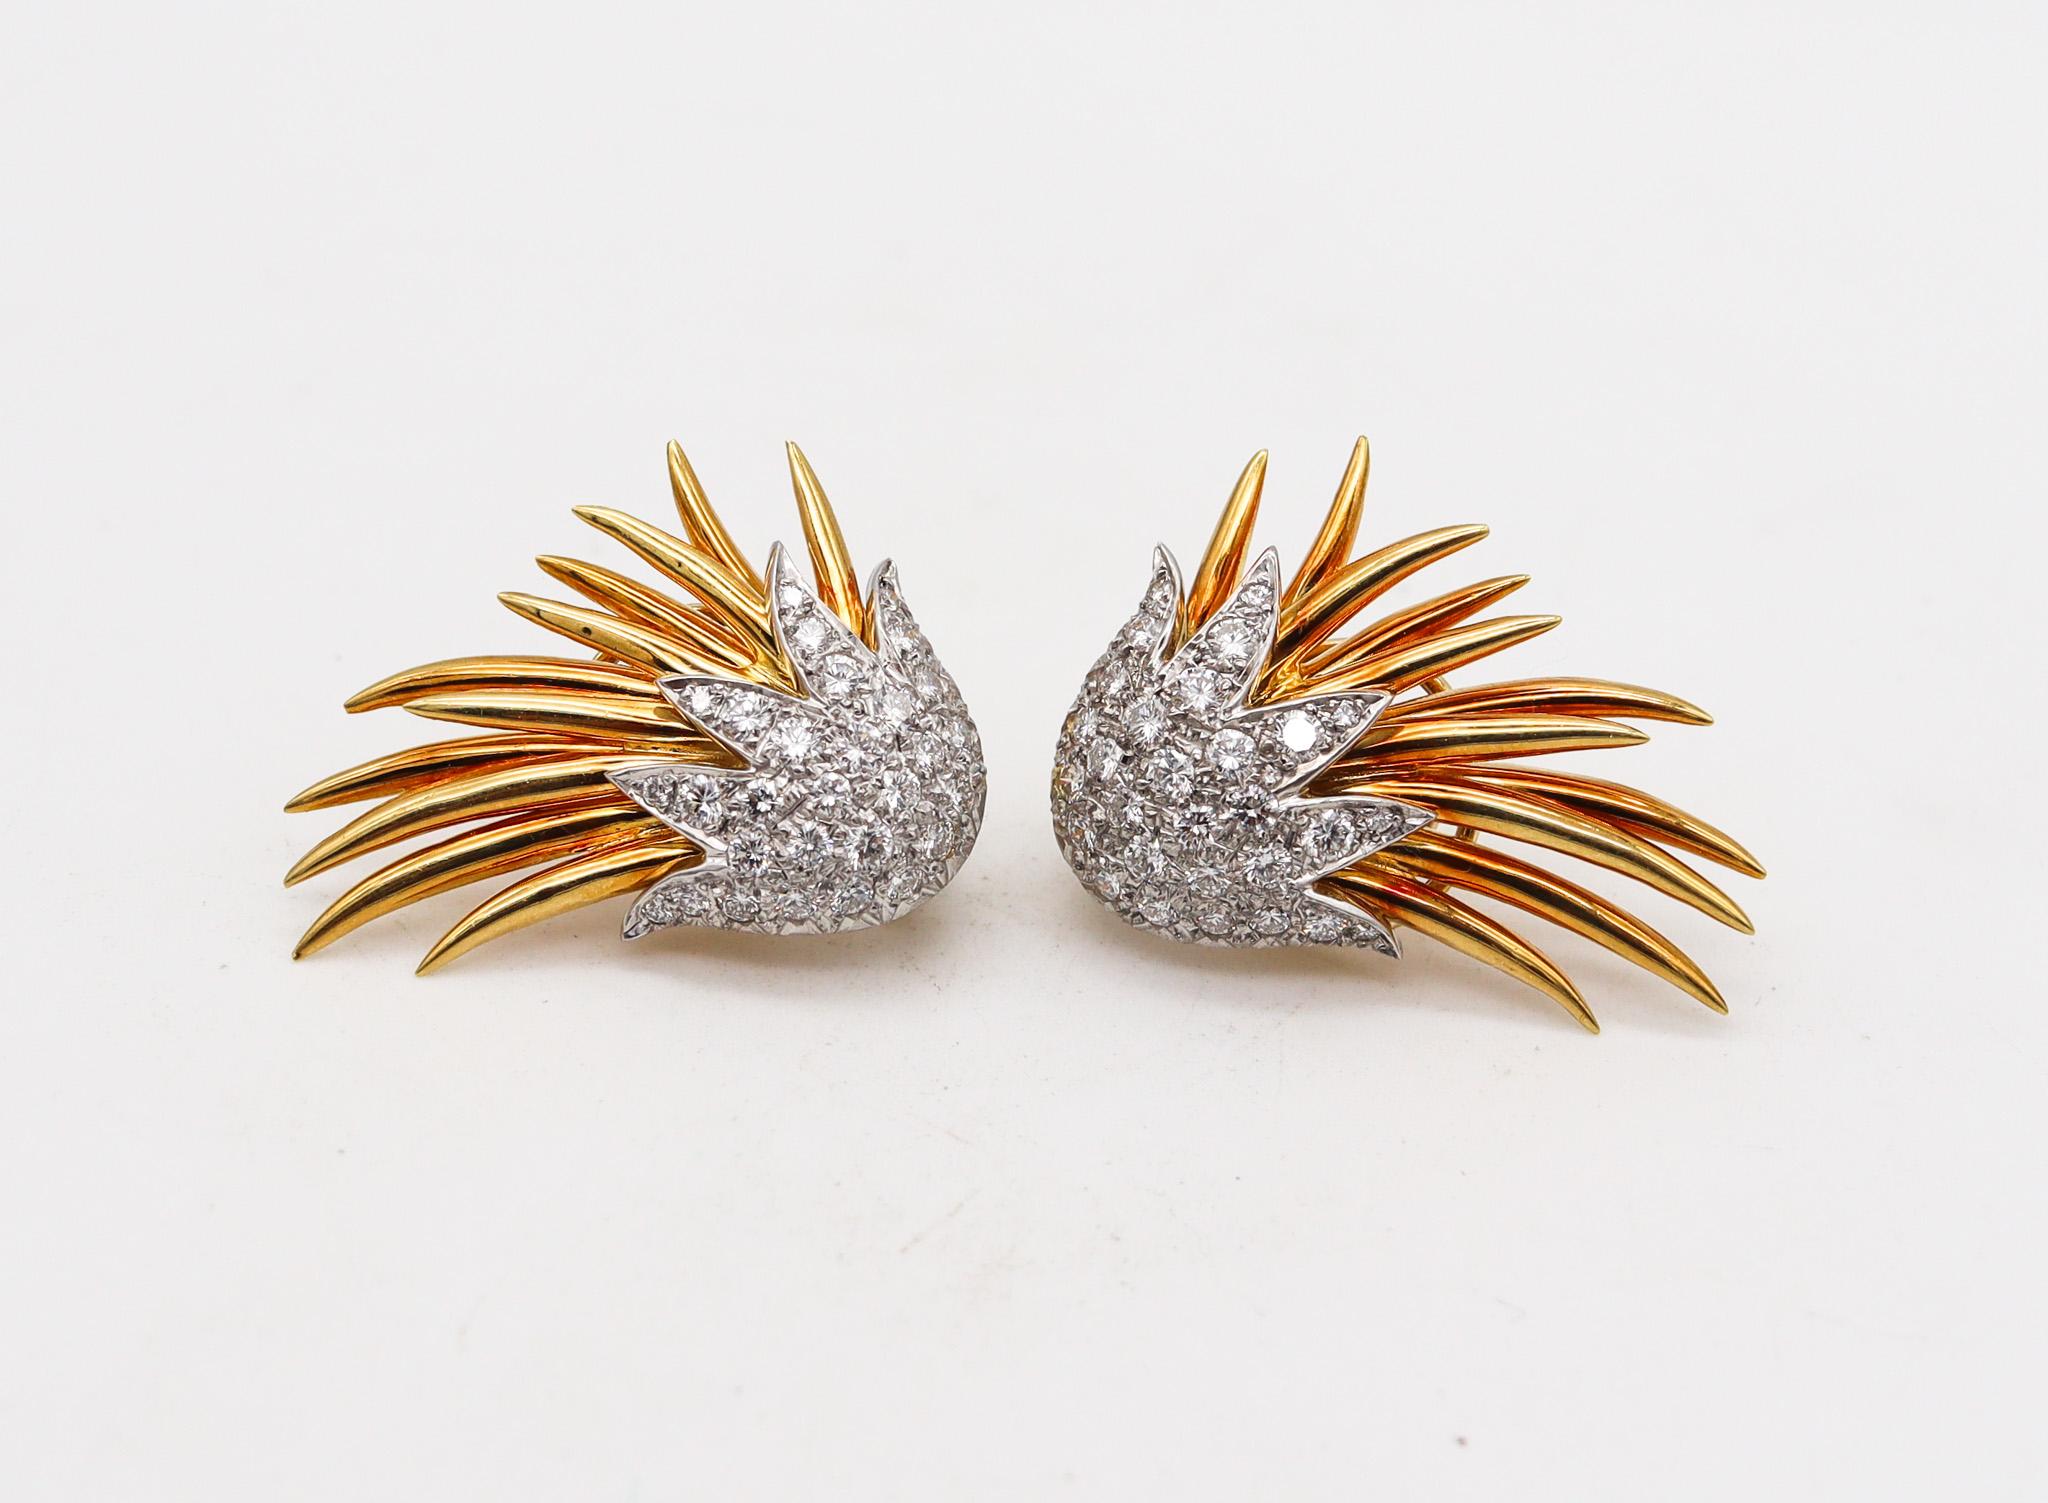 Clips earrings designed by Tiffany & Co.

An iconic pair of earrings created in New York city by the Tiffany Studios, back in the 1970's. This pair was crafted with spiky flames patterns, made up in solid yellow gold of 18 karats and platinum parts